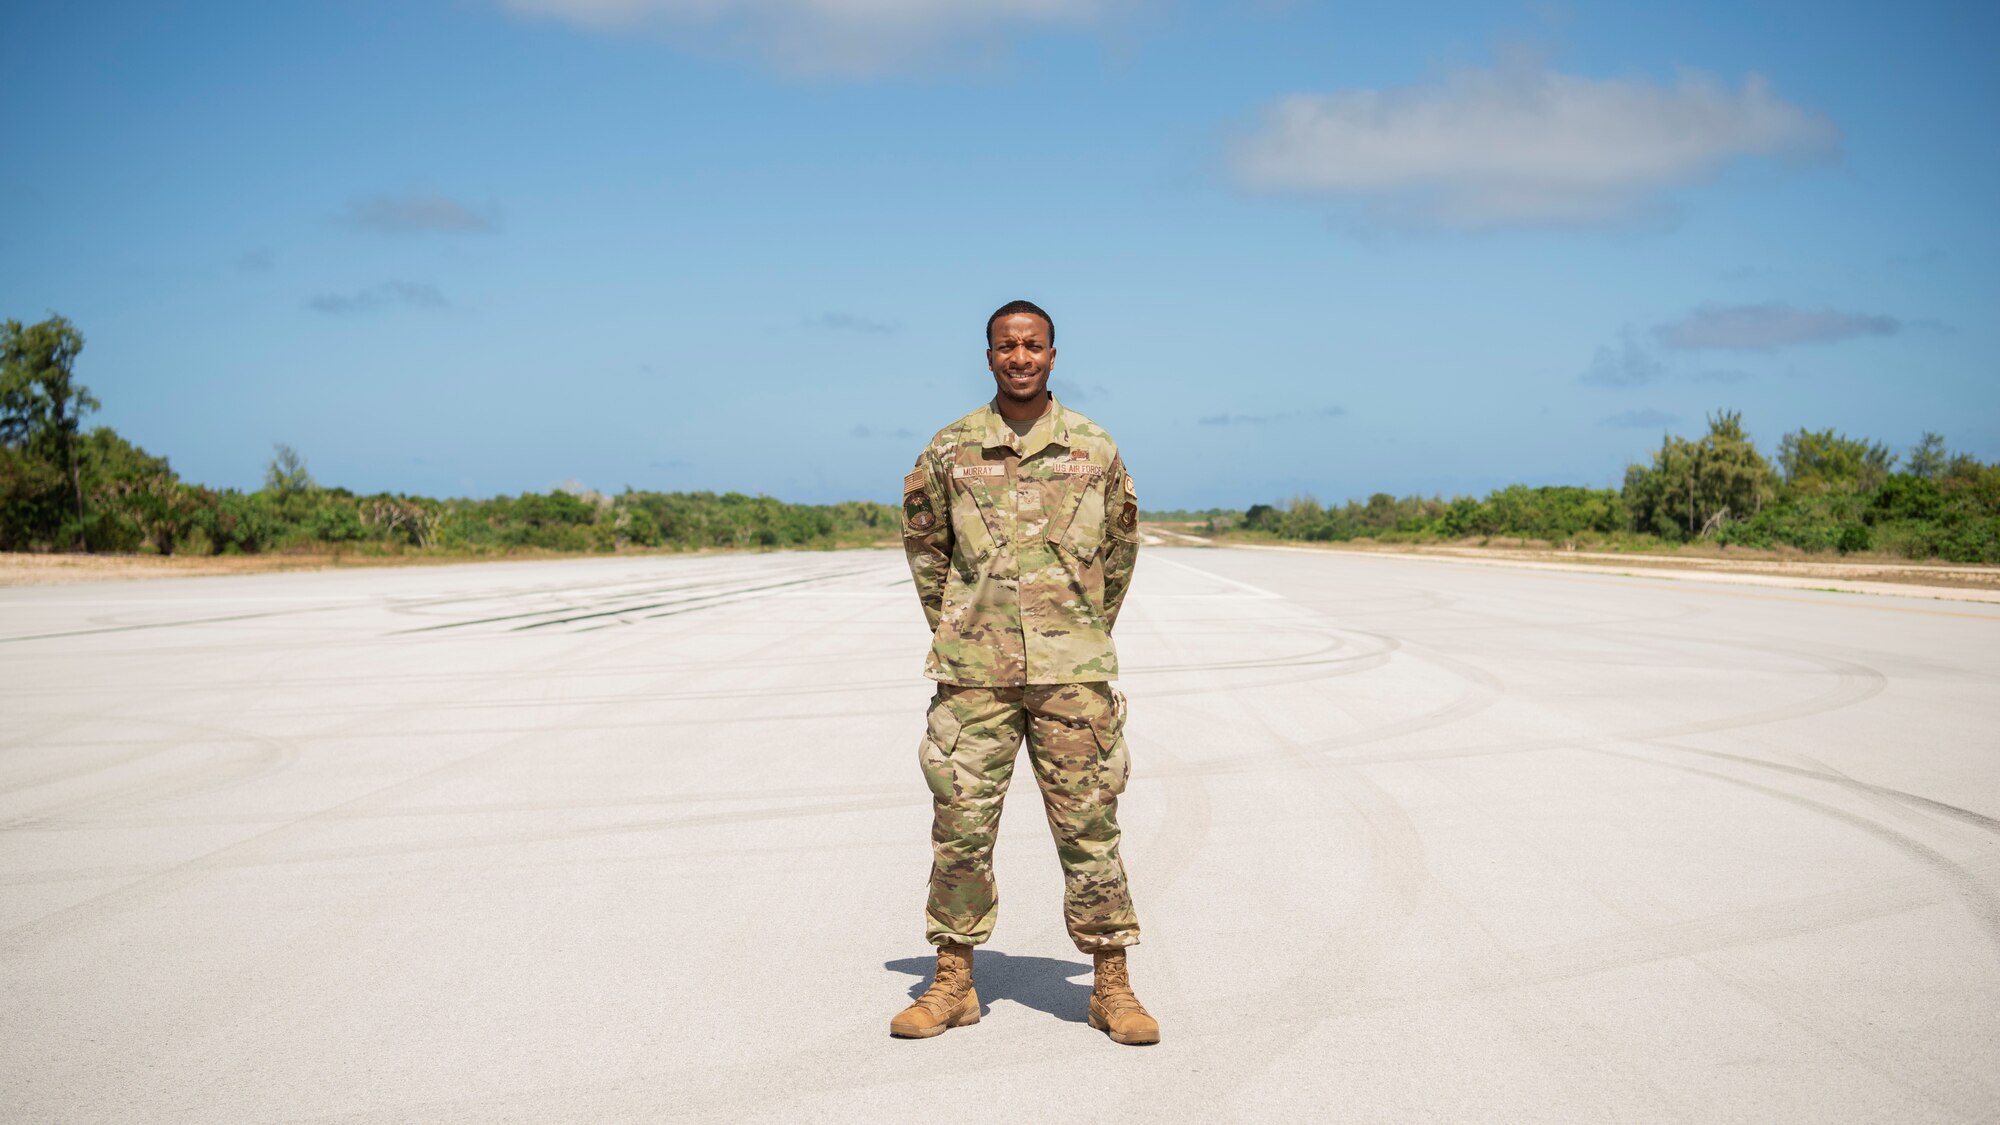 U.S. Air Force Staff Sgt. Wesley Murray, a cyber surety supervisor with the 644th Combat Communications Squadron, poses for a photo at Andersen Air Force Base, Guam, Feb. 10, 2021. During his Air Force career, Murray served at three duty stations and four deployed locations, and was able to obtain seven certificates in various advancements benefiting every unit he was attached to. (U.S. Air Force photo by Senior Airman Aubree Owens)